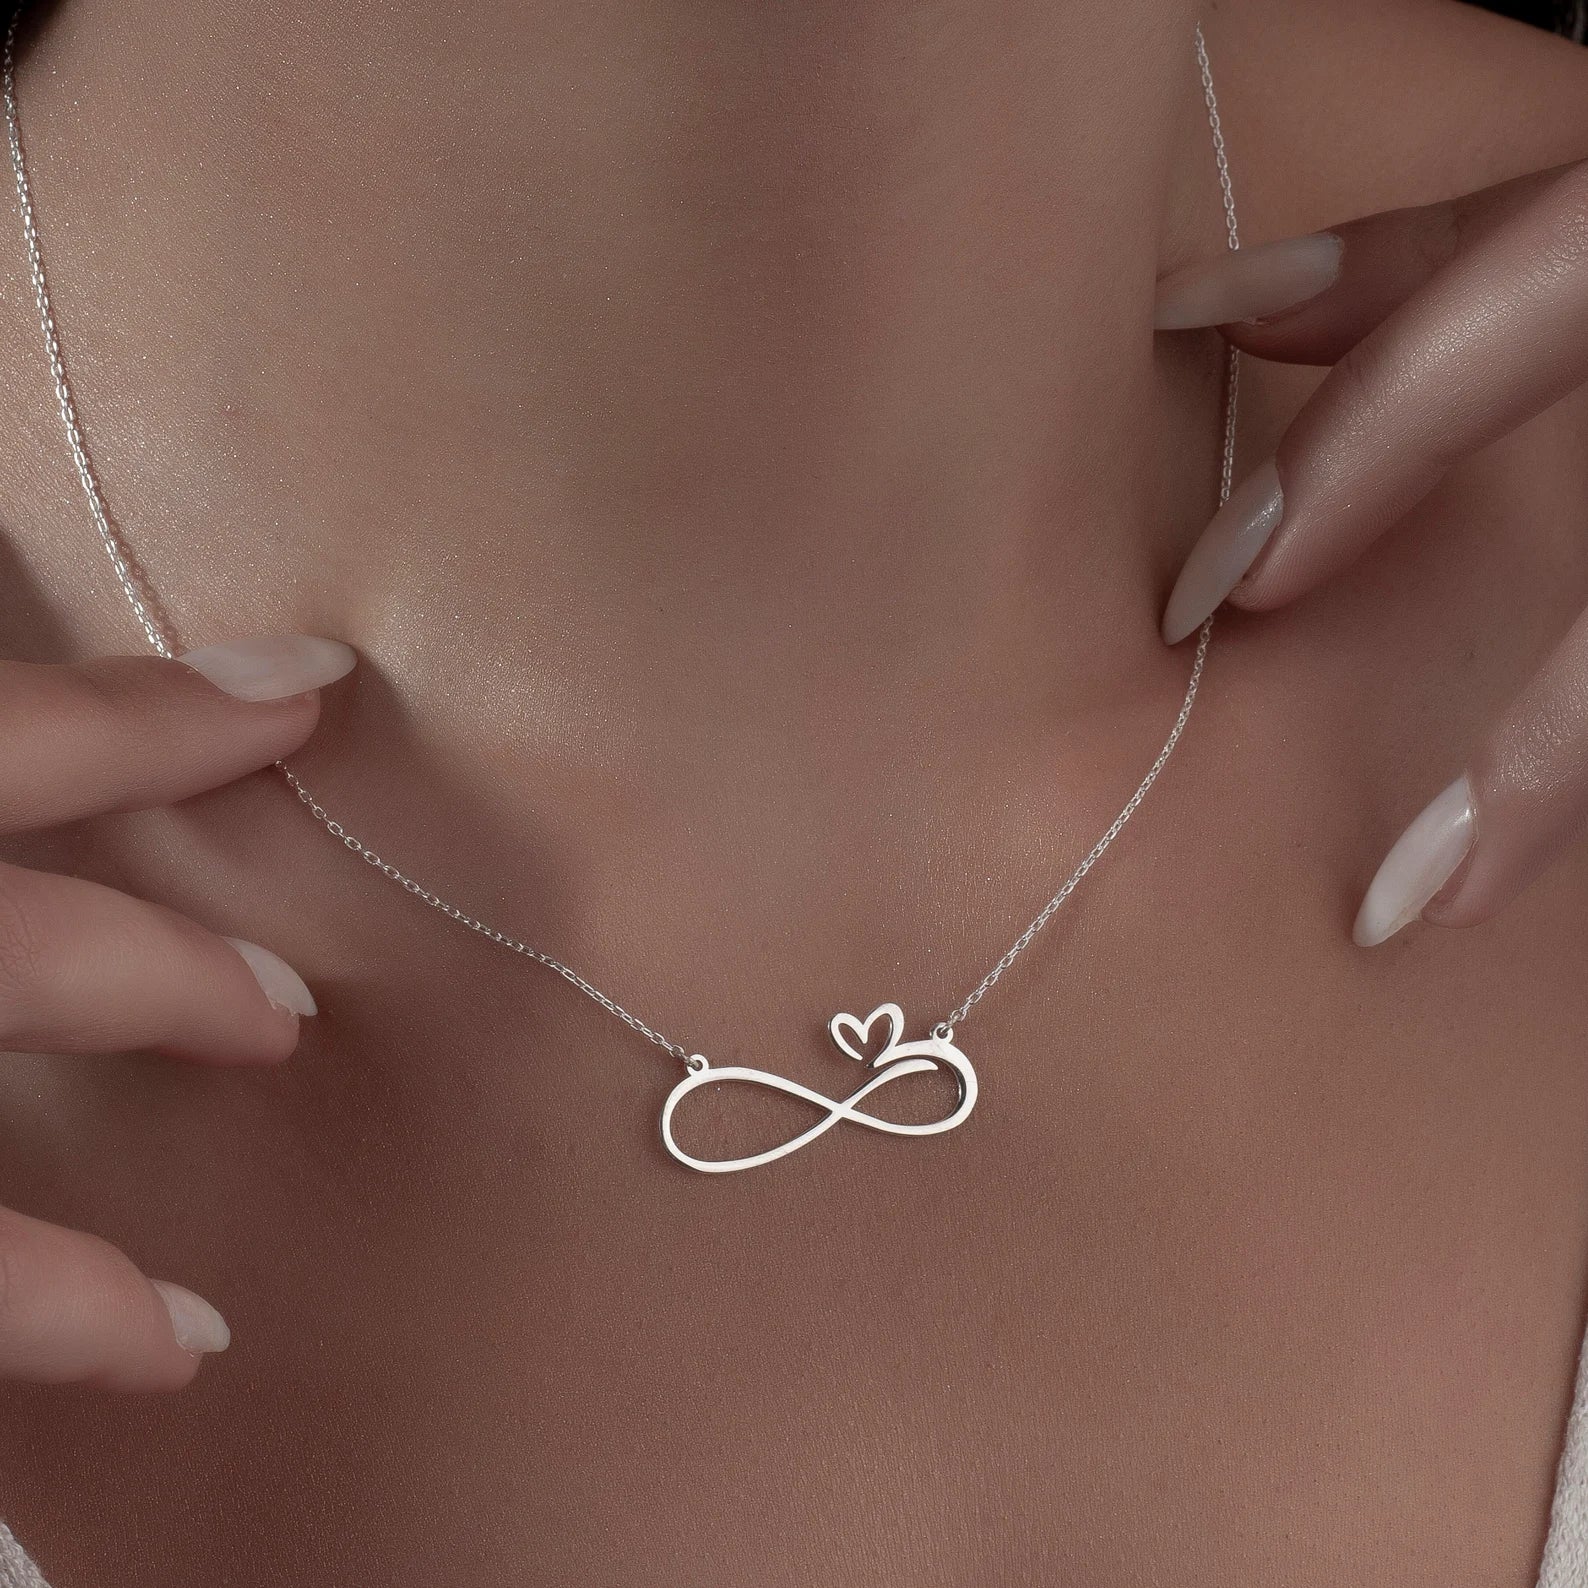 18 Carat Gold Infinity Heart Necklace - A Radiant Symbol of Eternal Love